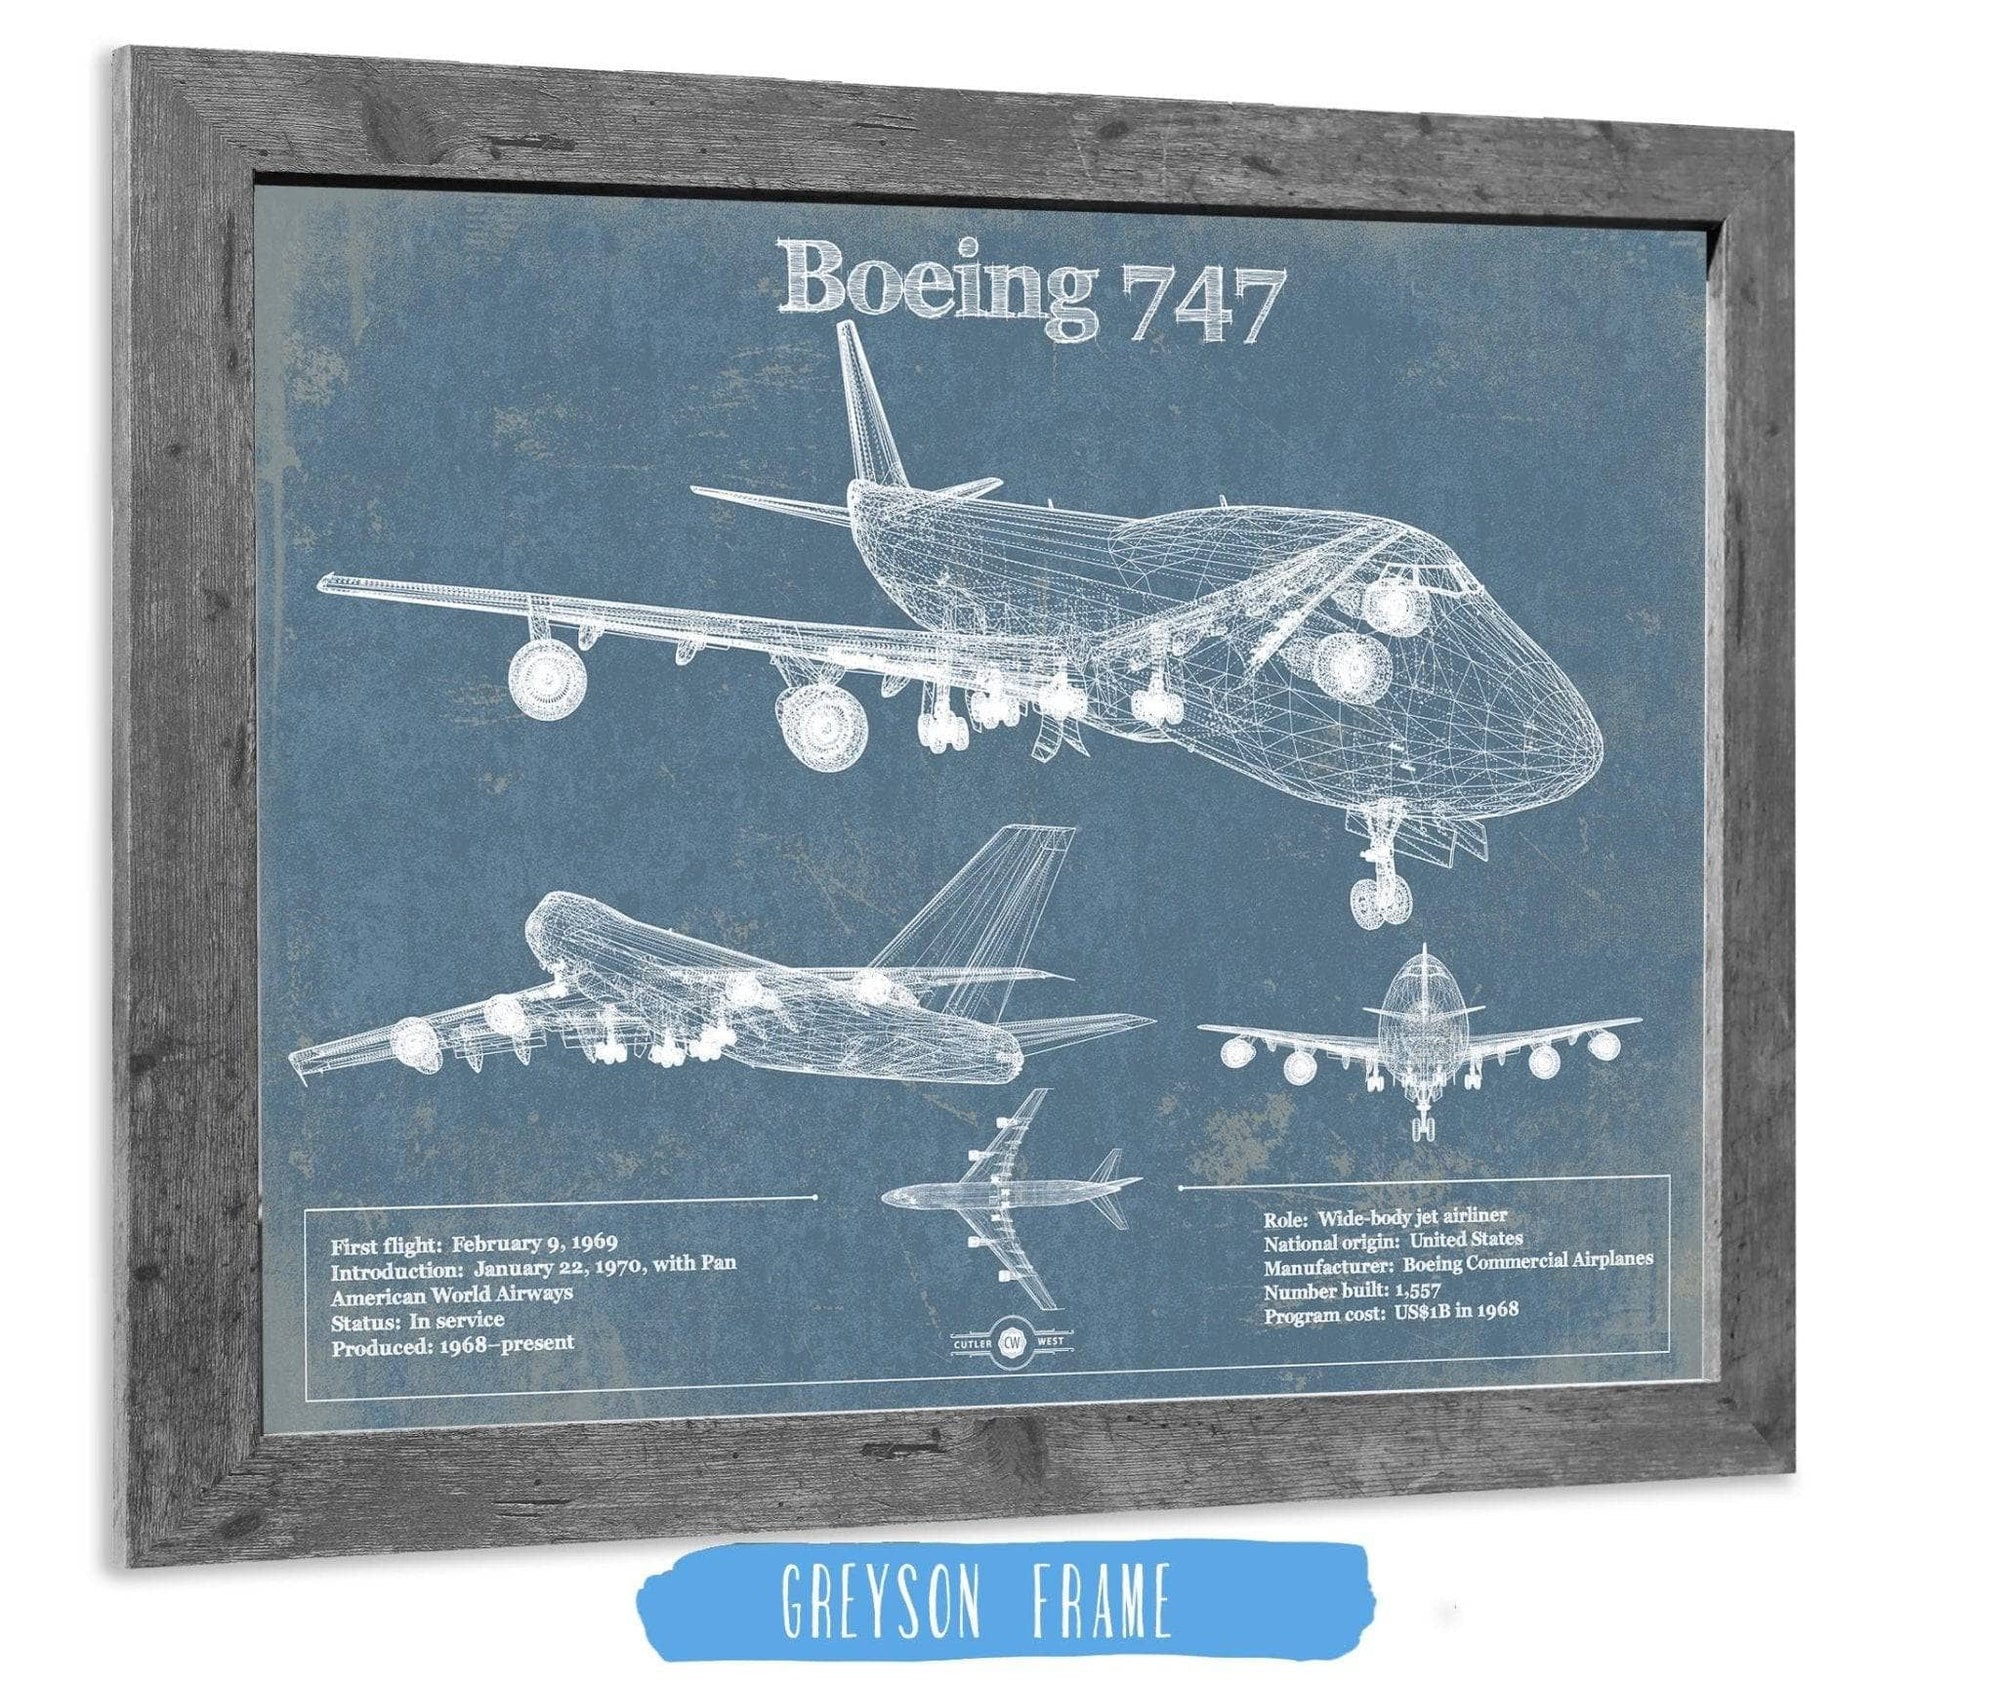 Cutler West Boeing Collection 14" x 11" / Greyson Frame Boeing 747 Vintage Aviation Blueprint Print - Custom Pilot Name Can Be Added 806363257-TOP